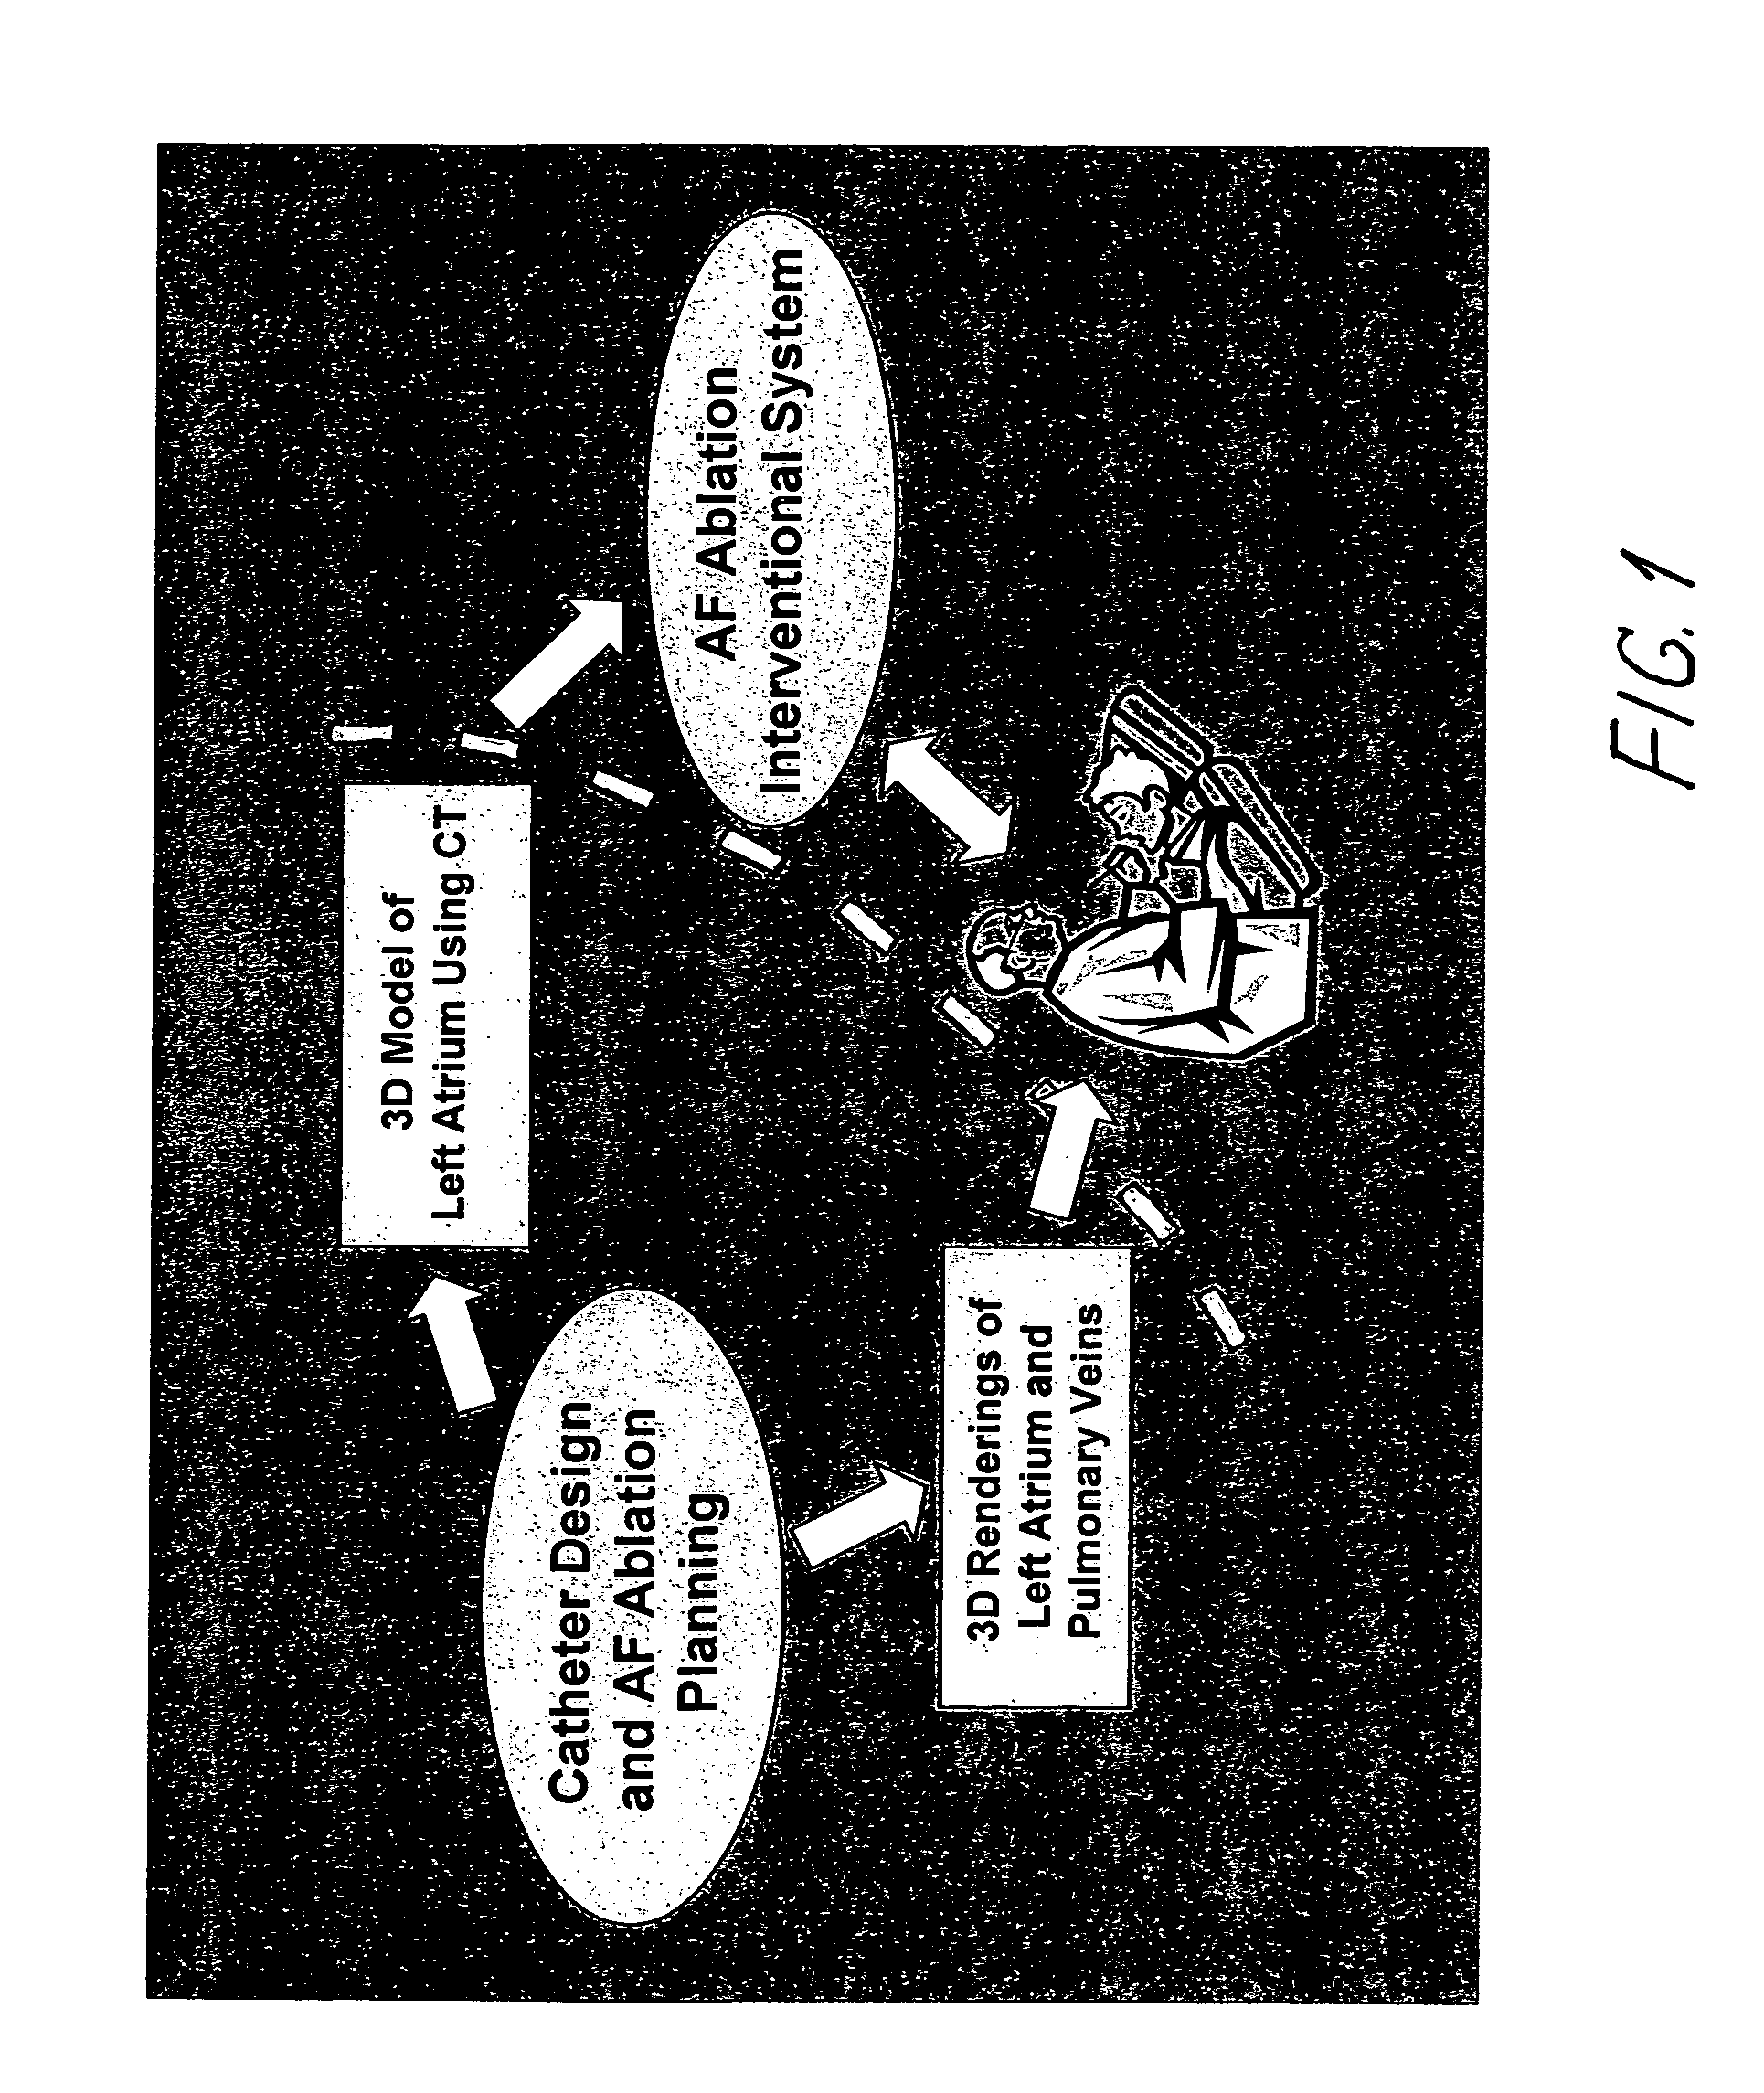 Method for pulmonary vein isolation and catheter ablation of other structures in the left atrium in atrial fibrillation